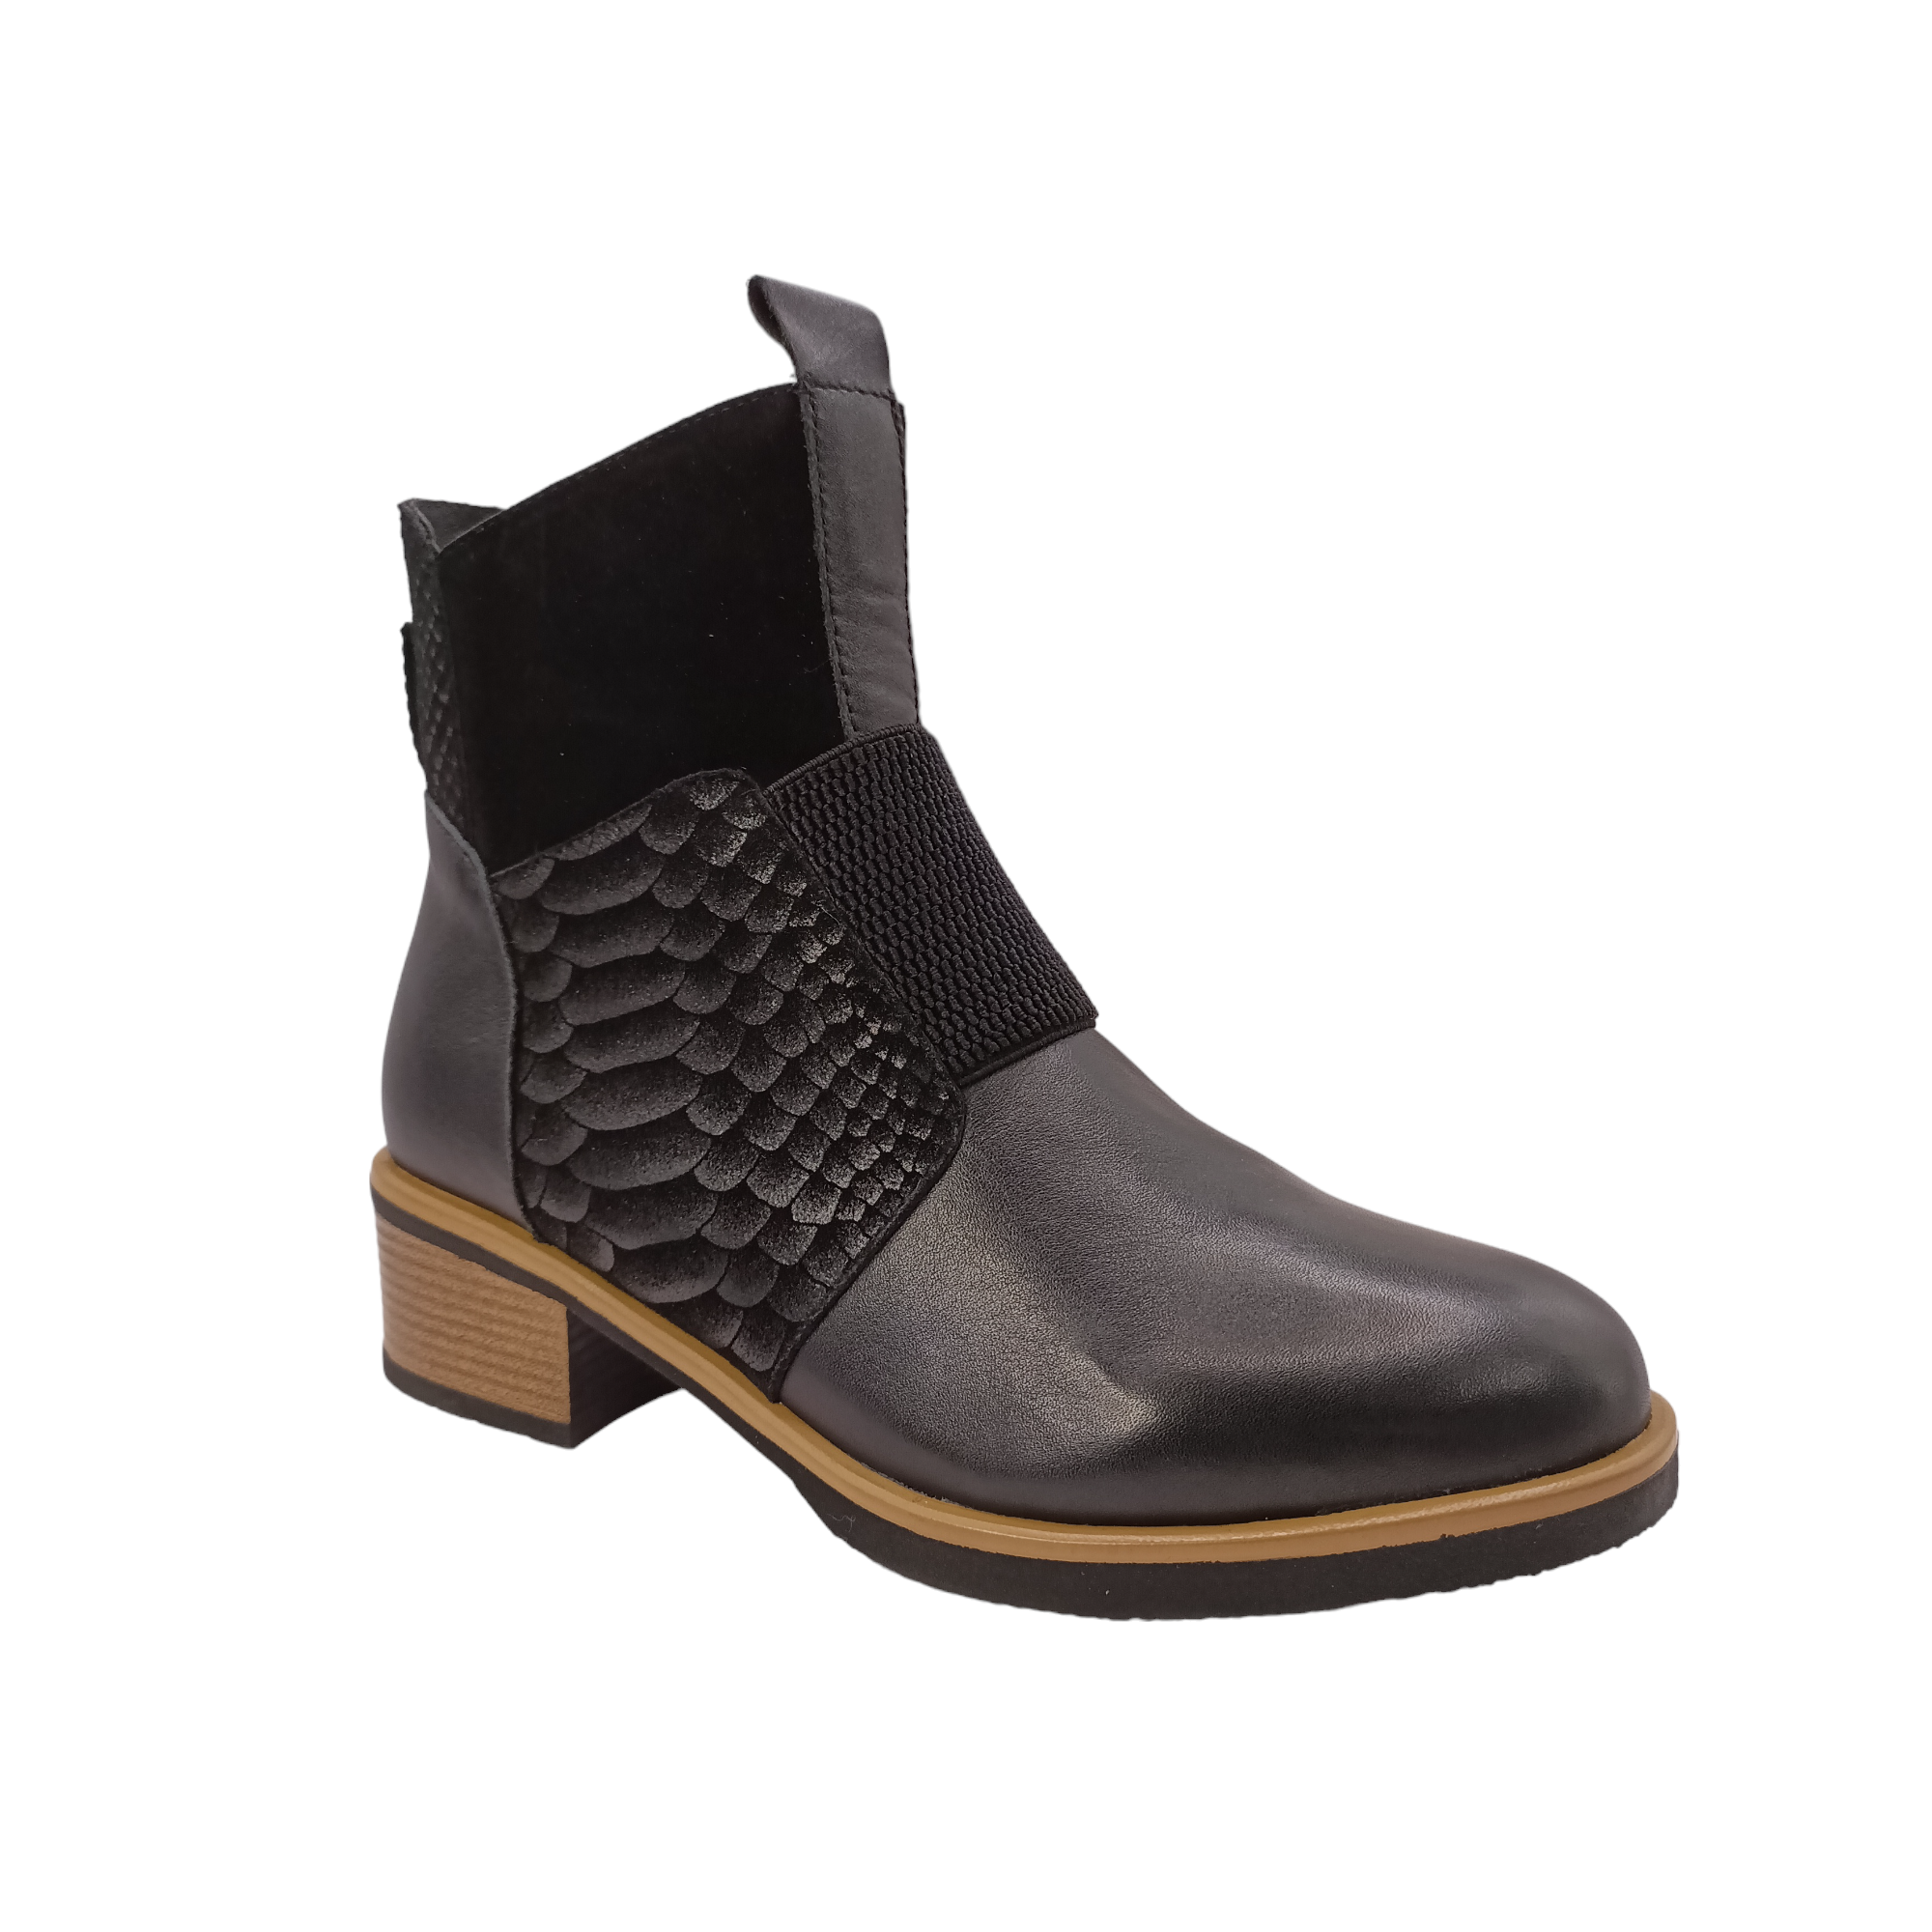 Shop Dread Bresley - with shoe&me - from Bresley - Boots - boots, Winter, Womens - [collection]